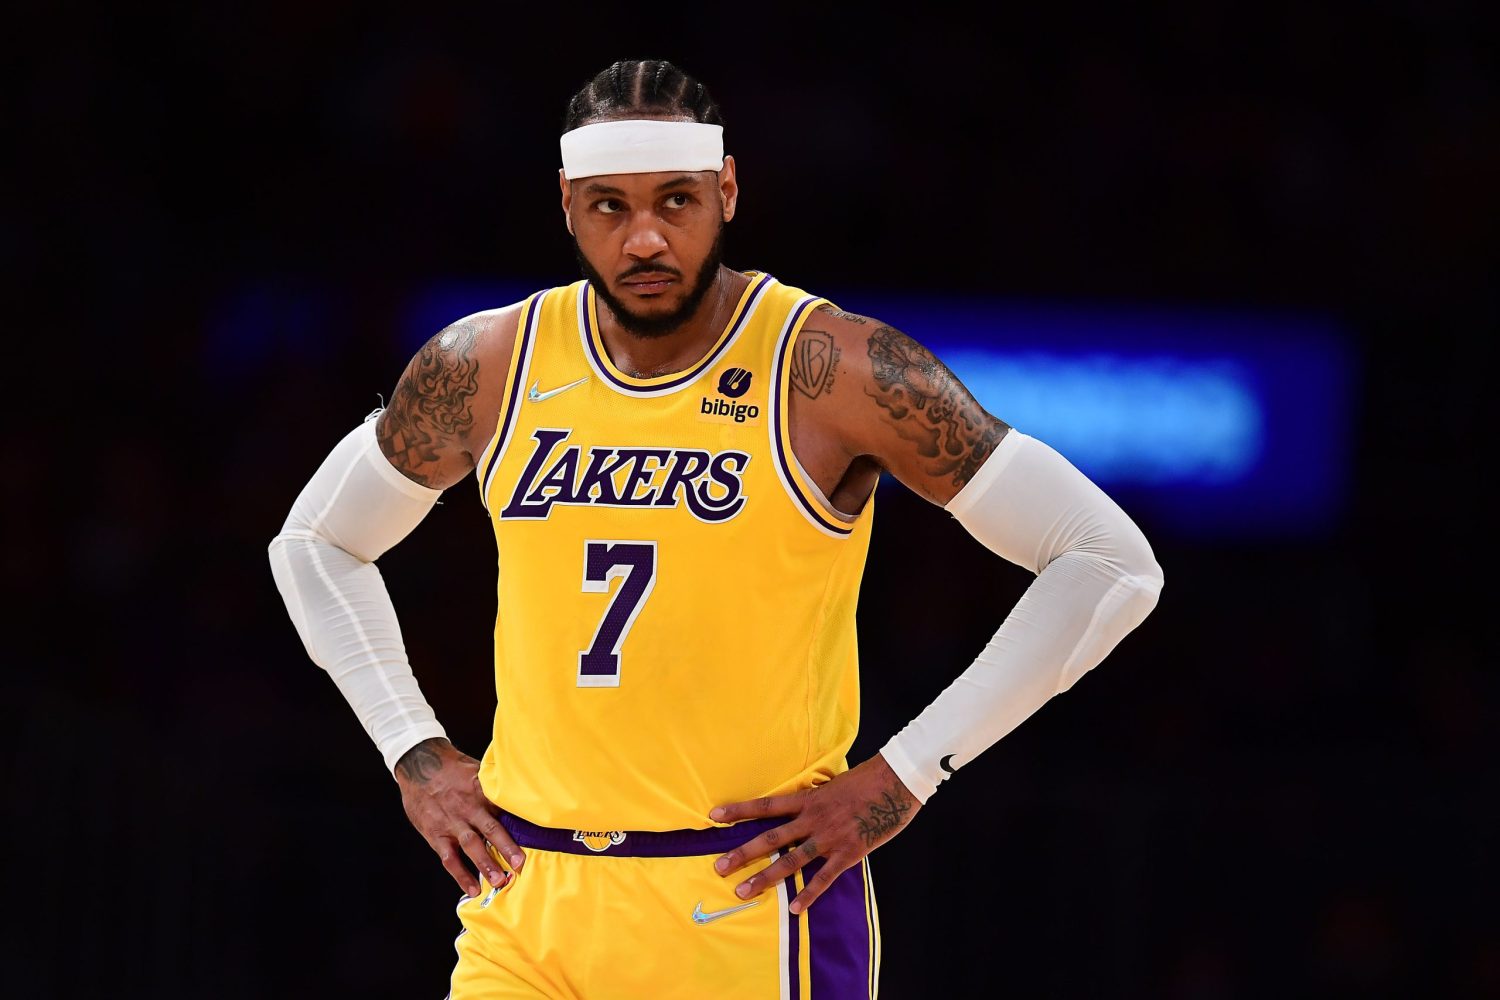 Carmelo Anthony Net Worth 2022 Salary, Endorsement: How Much does Carmelo Anthony Make a Year?